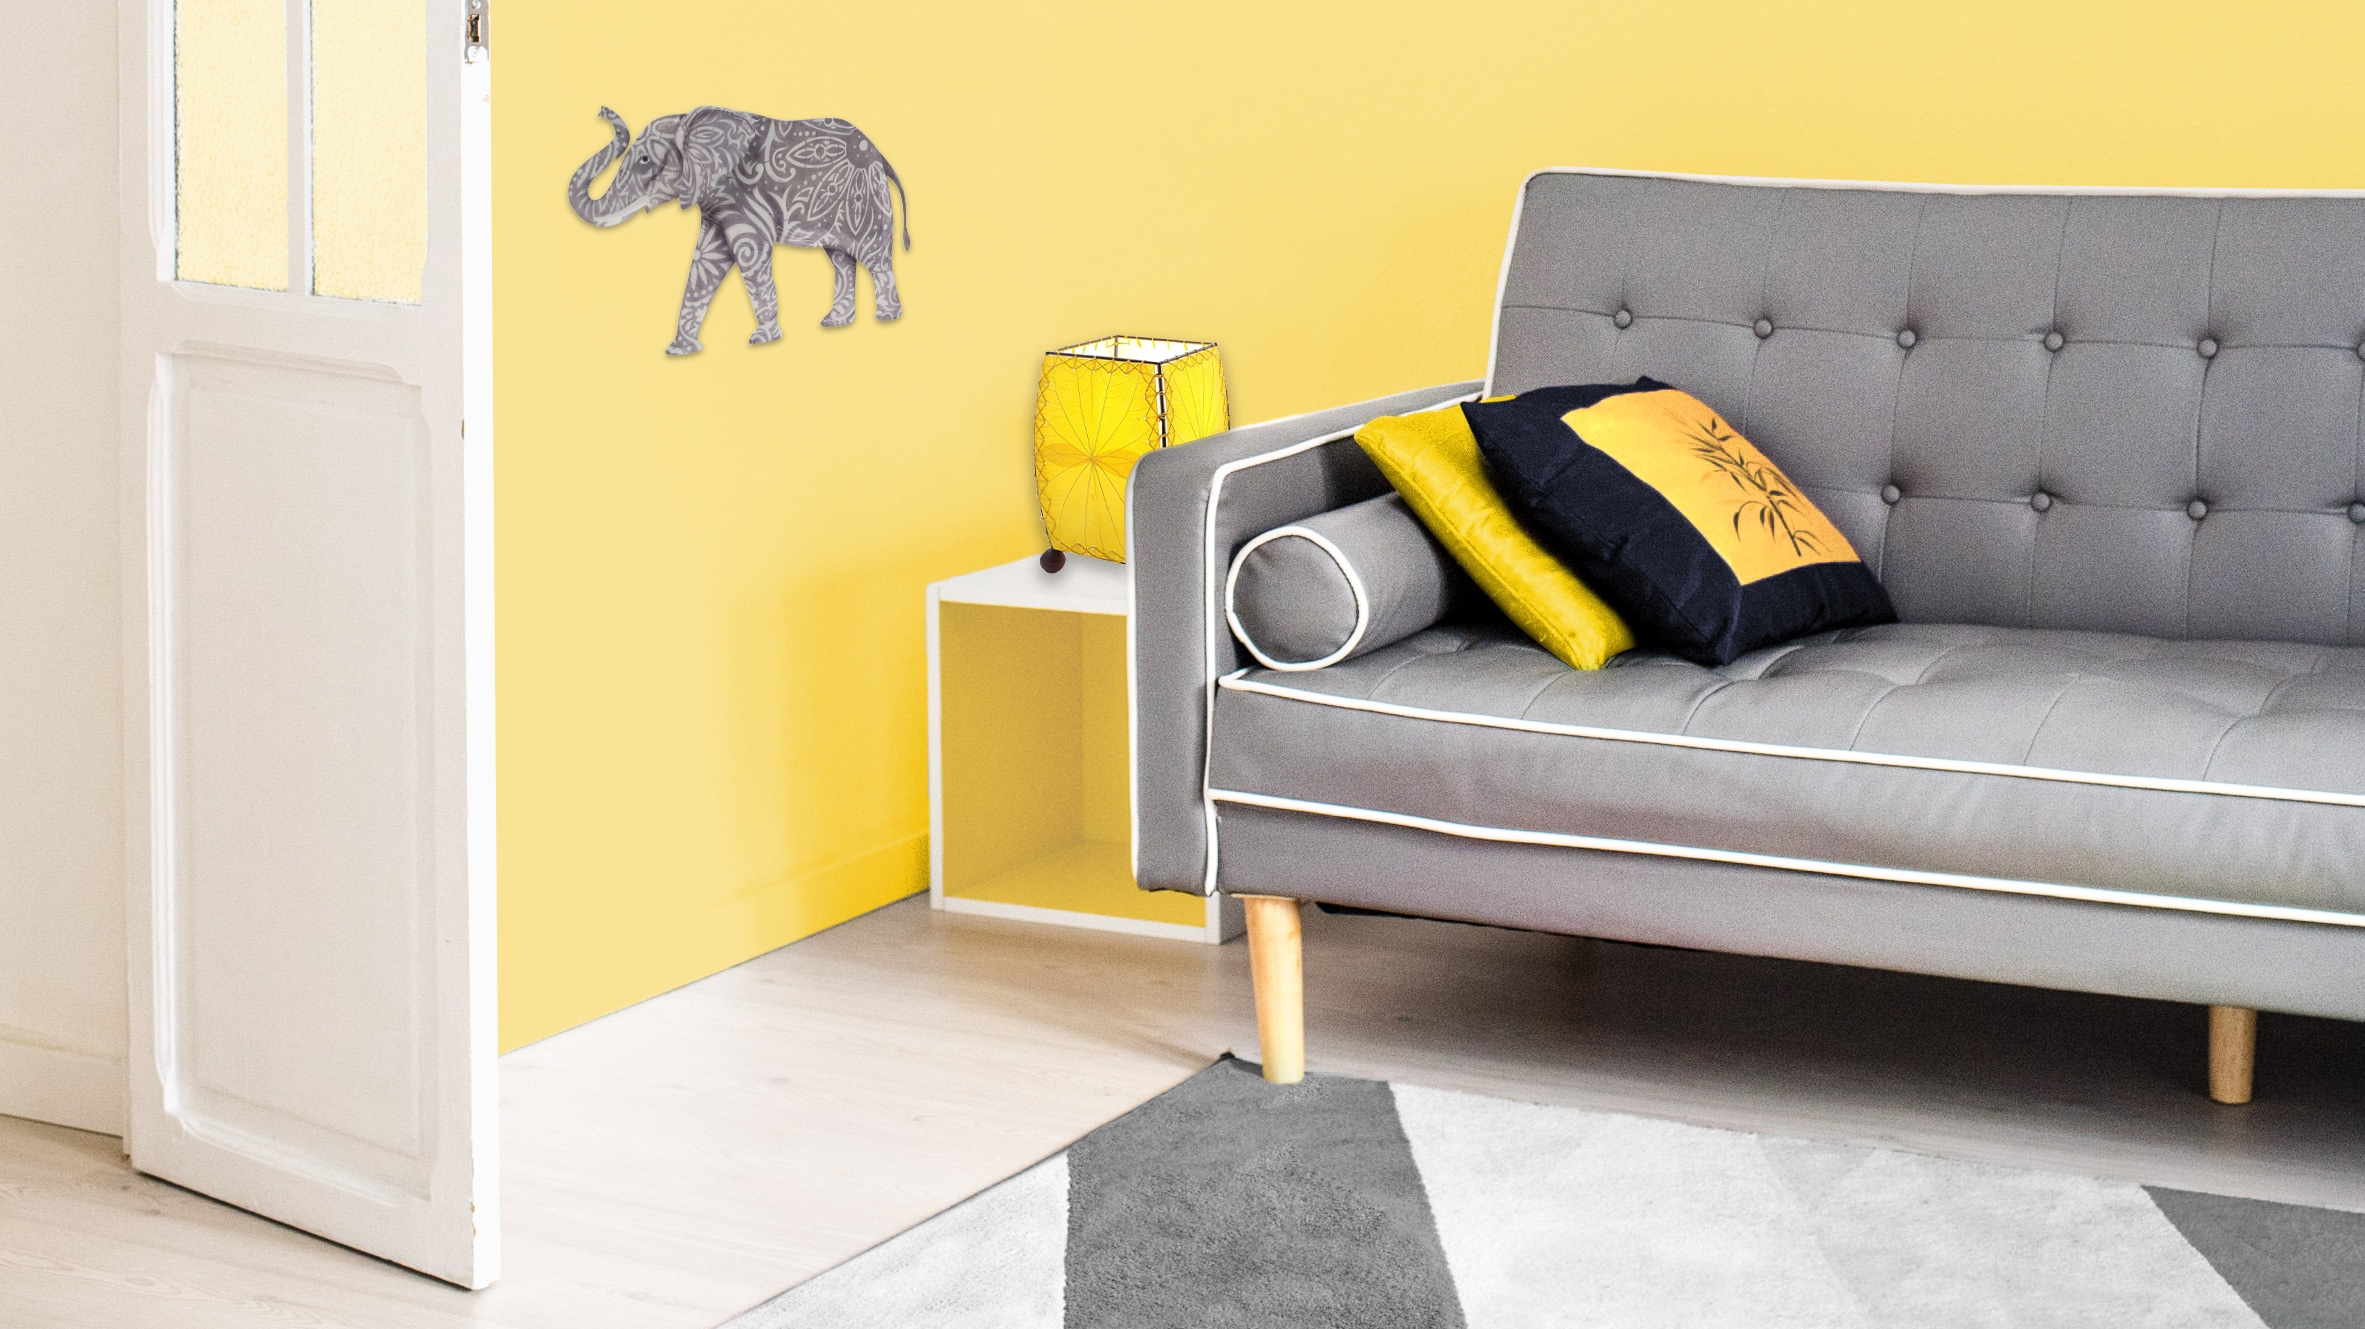 Living room with gray and yellow decor